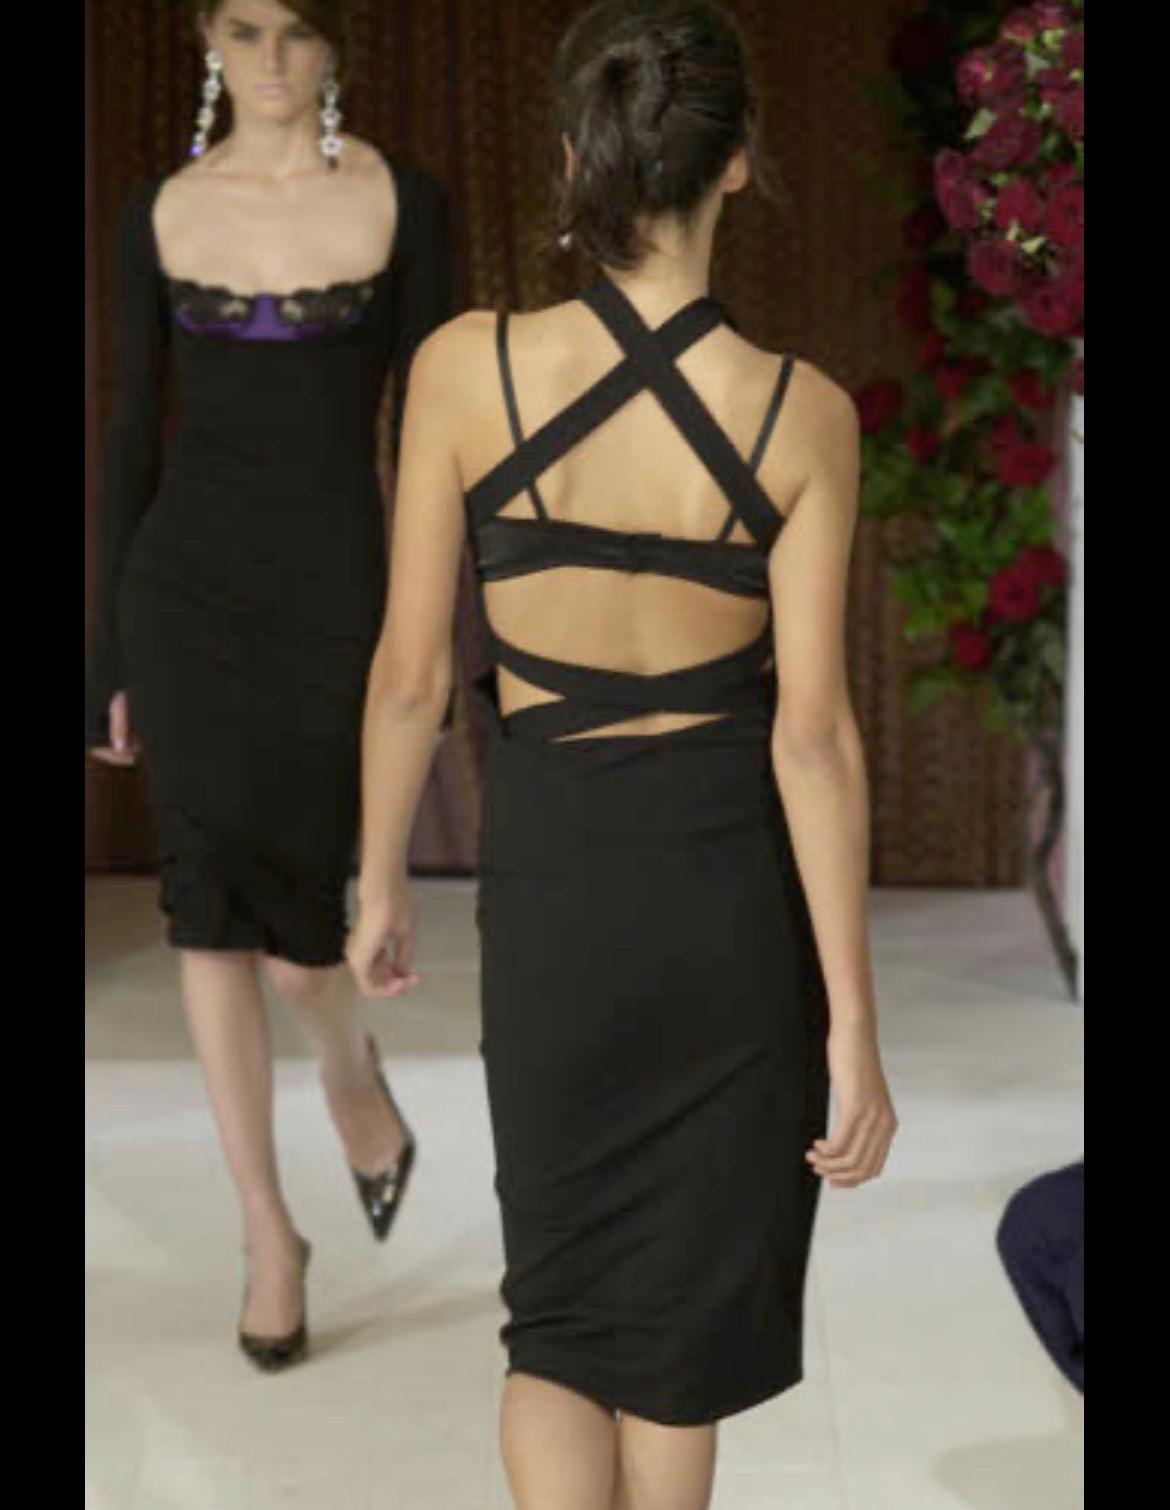 Presenting a stunning black Dolce & Gabbana backless dress. From the Spring/Summer 2001 collection, this dress debuted on the season's runway as look 5, modeled by Caroline Ribeiro. The same dress was worn by Kylie Jenner in white to the 'Look Mom I